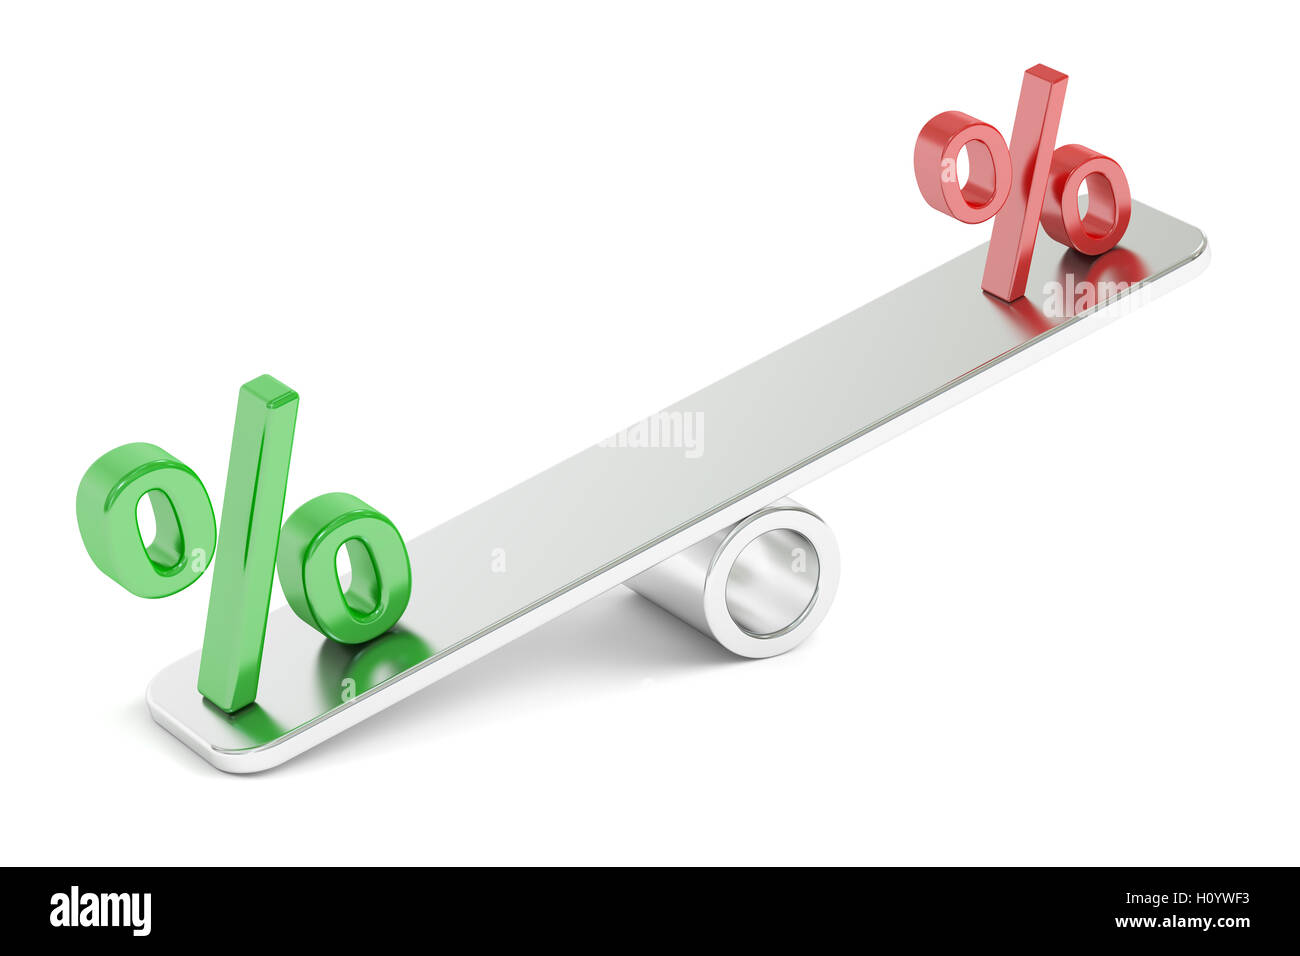 Percent Balance concept, 3D rendering isolated on white background Stock Photo